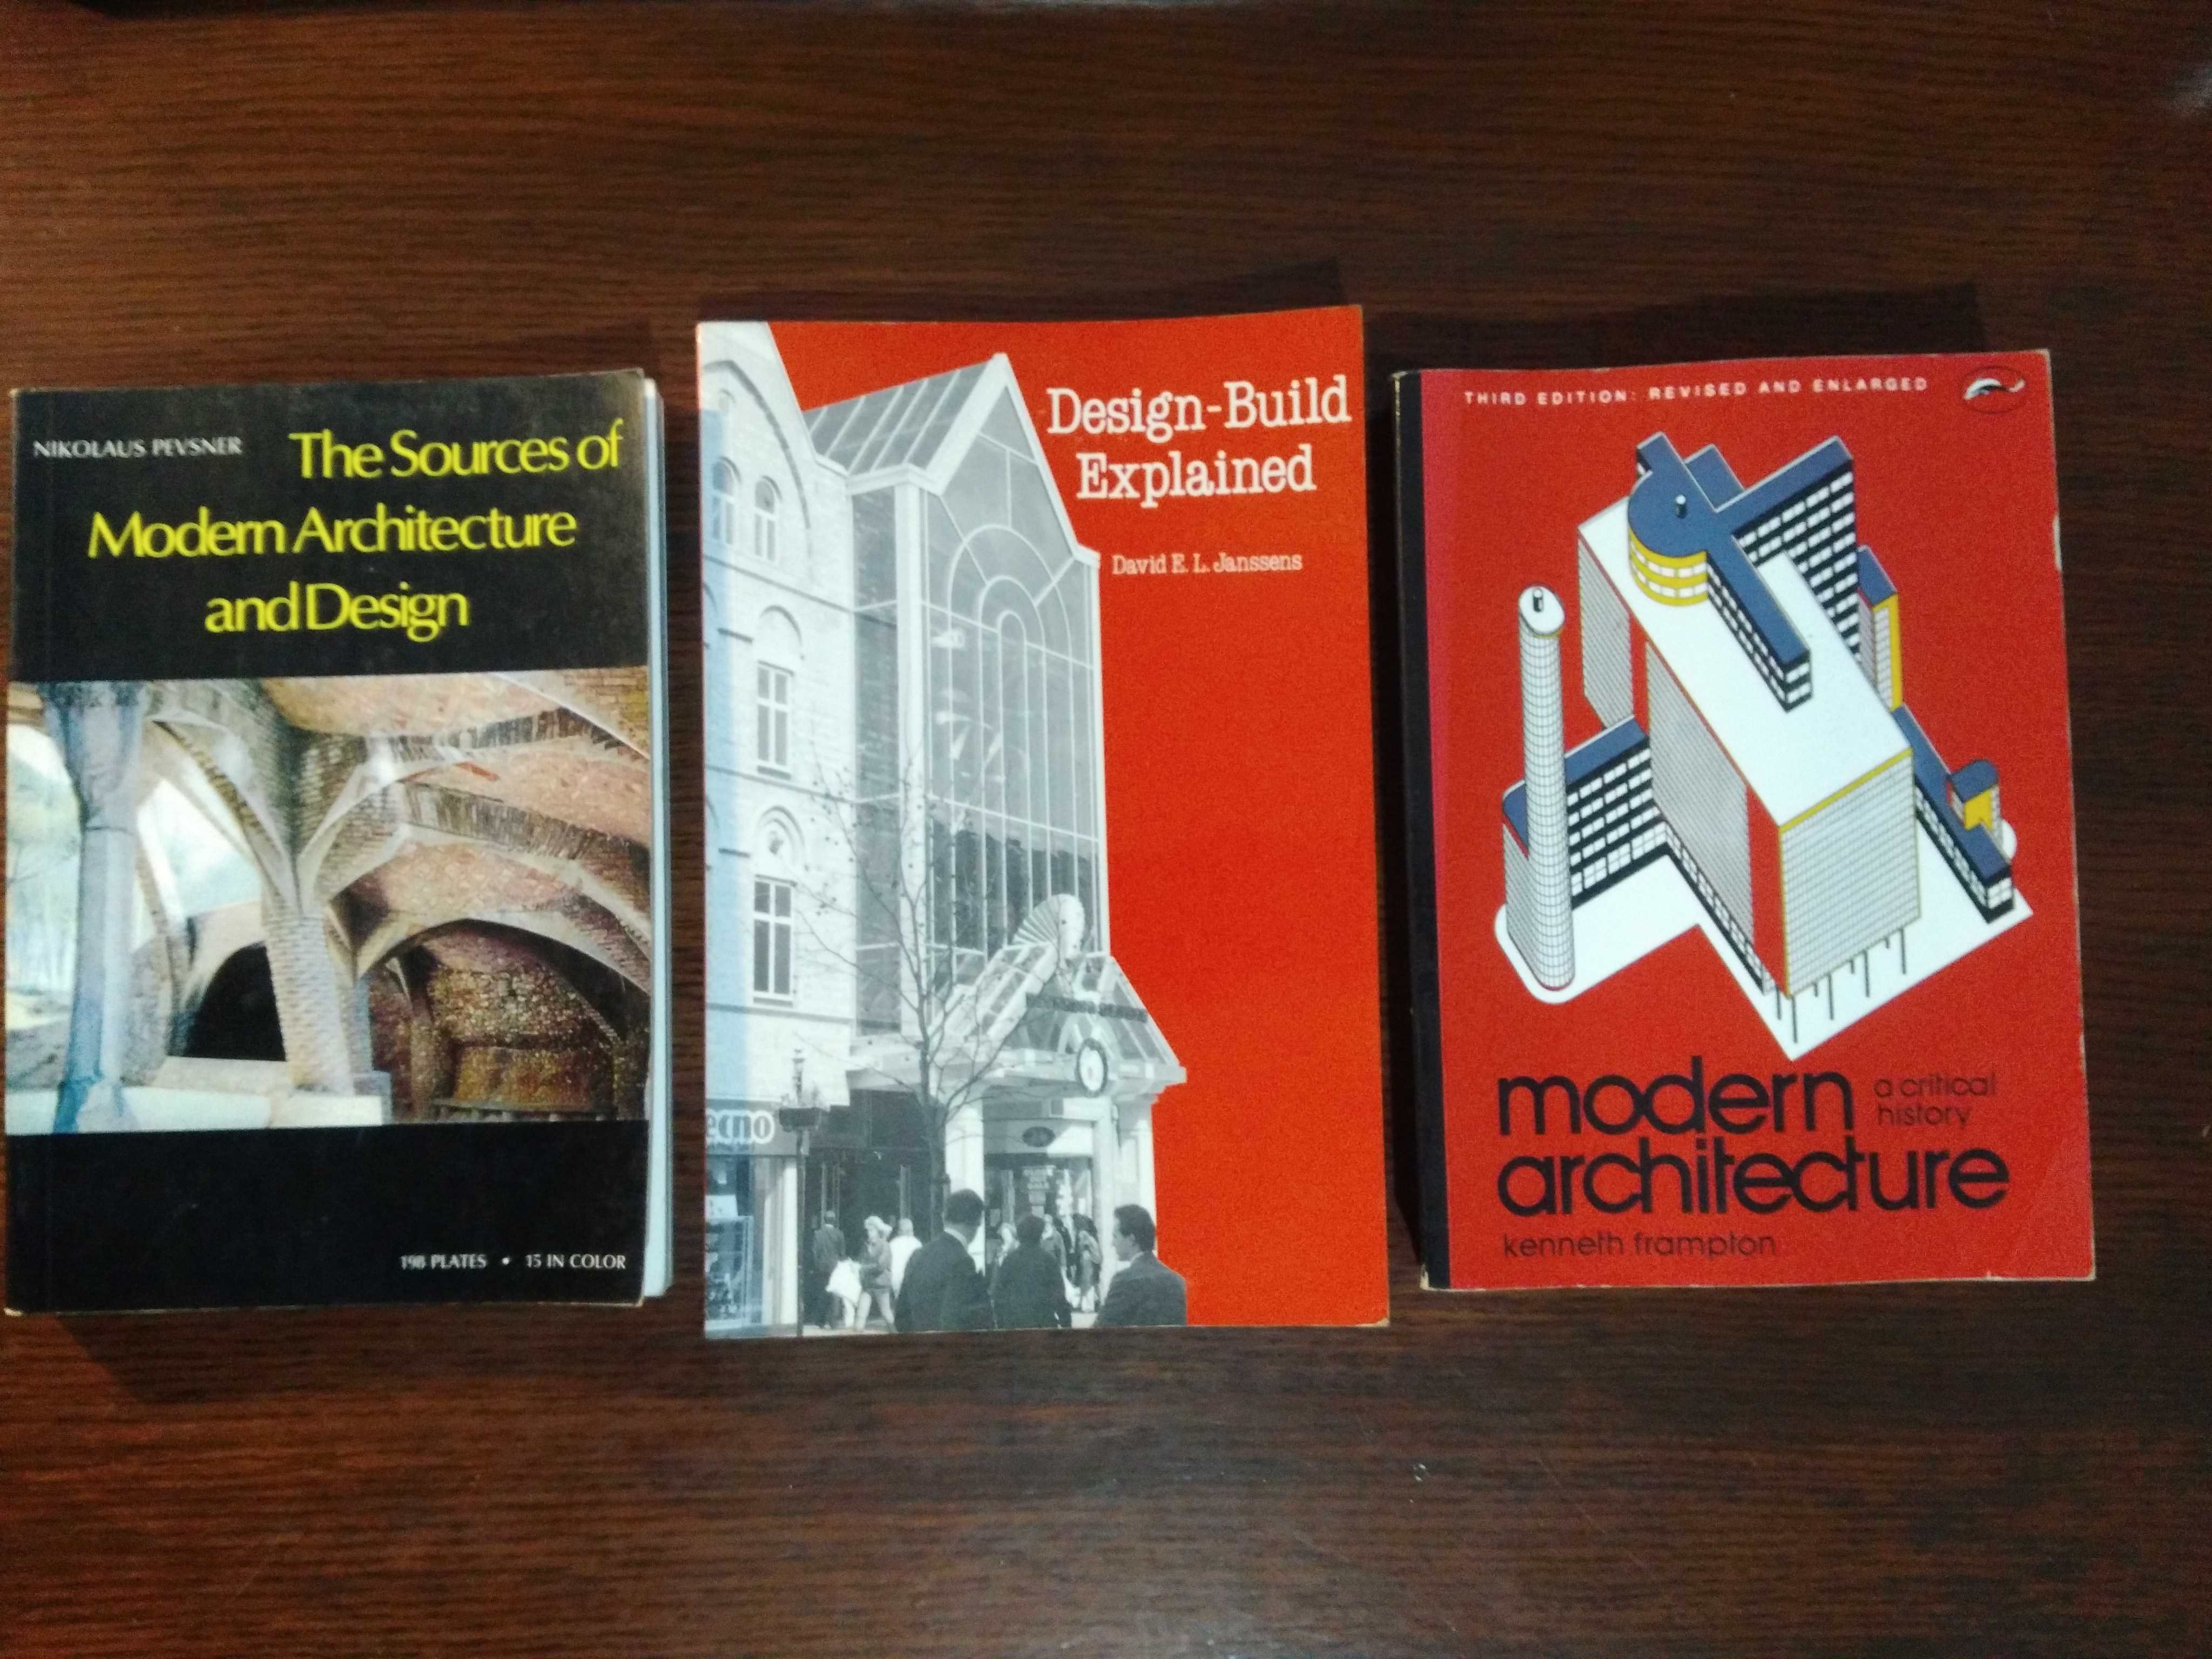 The Sources of Modern Architecture and Design - Design-Build Explained